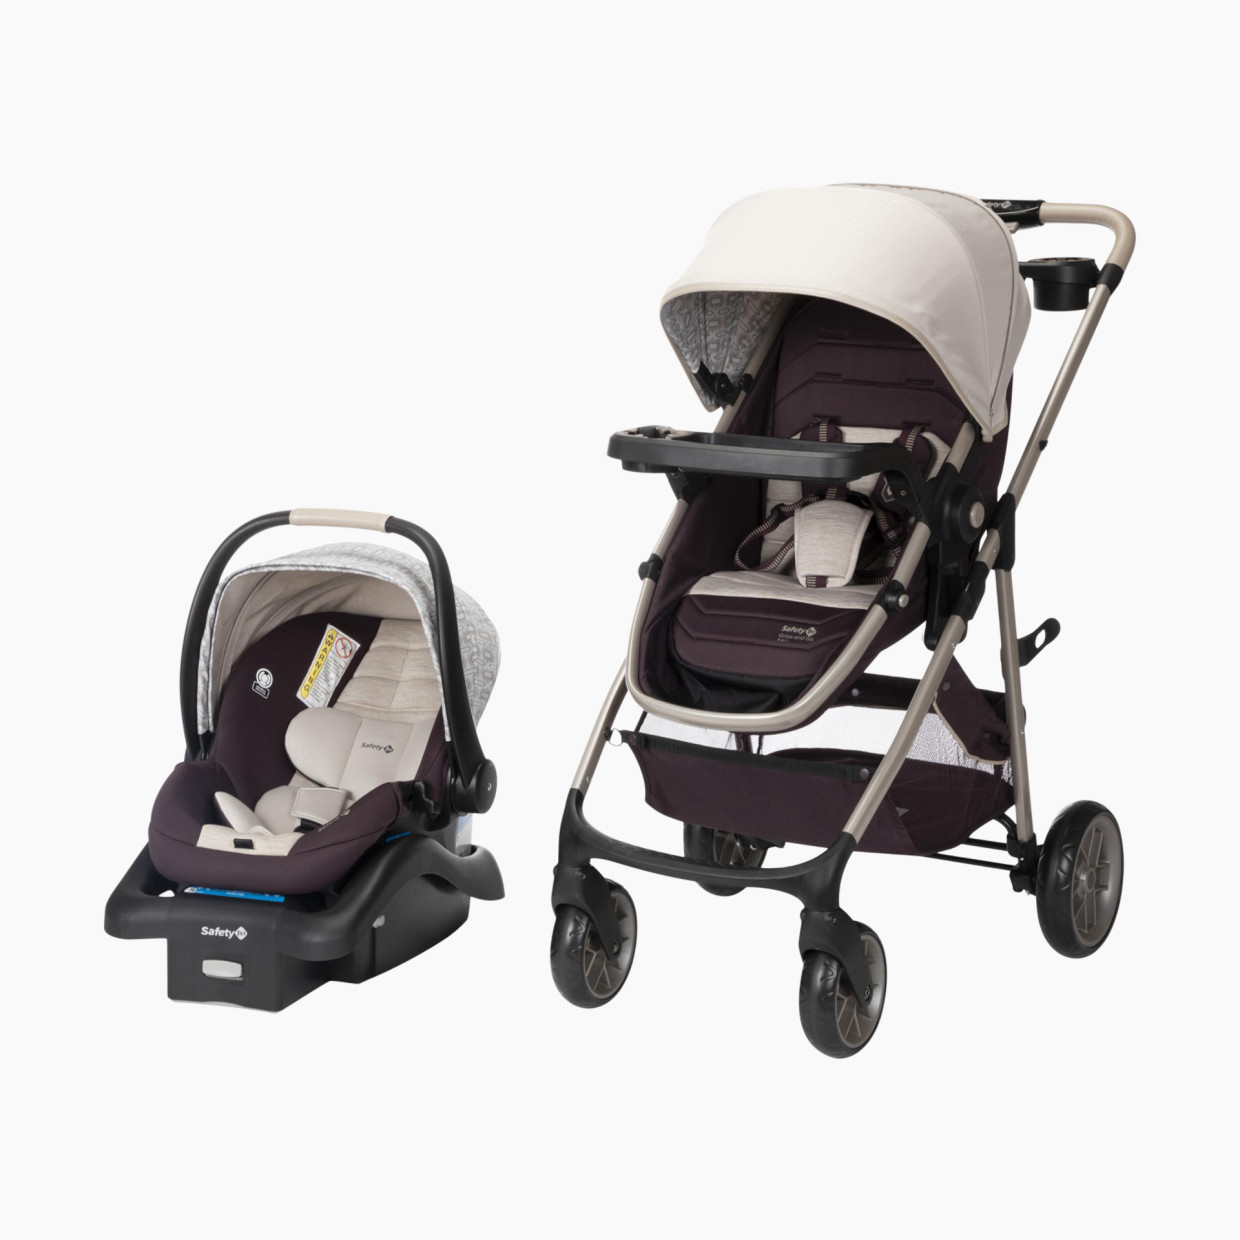 Safety 1st Deluxe Grow and Go Flex 8-in-1 Travel System - Dune's Edge.